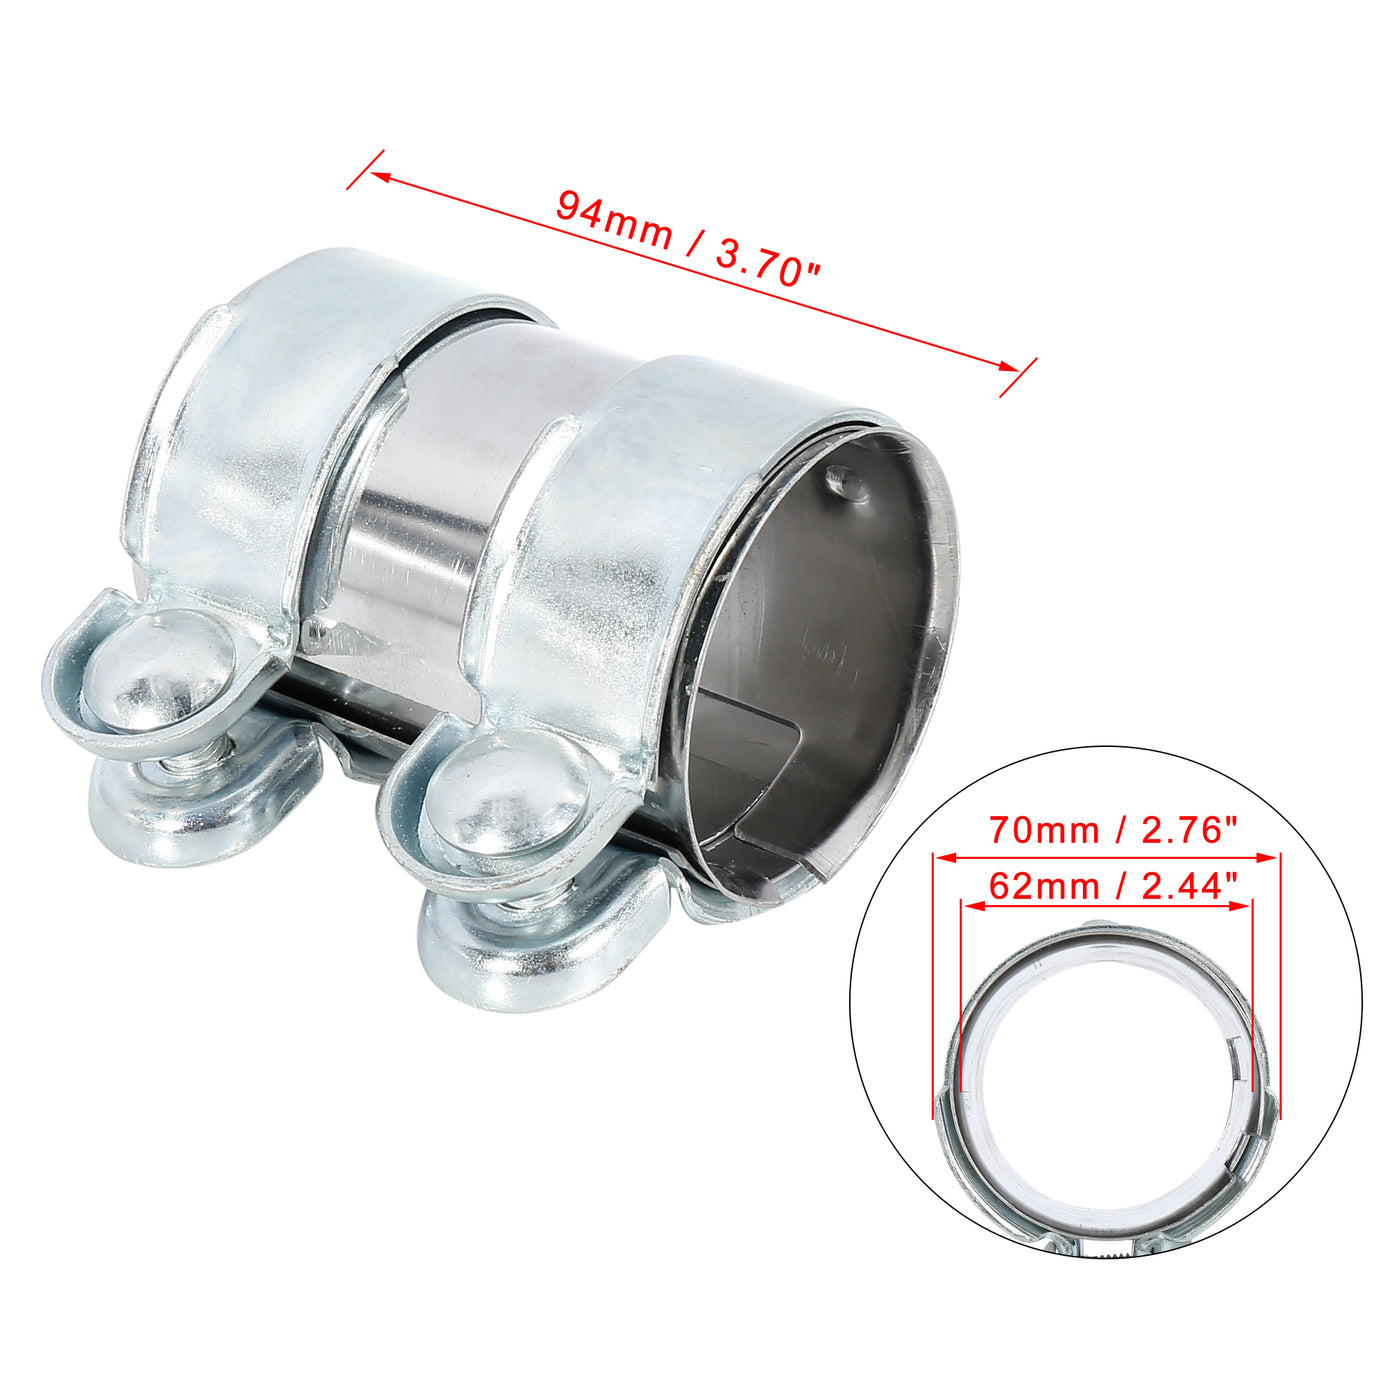 X AUTOHAUX Exhaust Pipe Sleeve Connector Clamp Coupler for VW Golf Jetta Passat 62 x 94 mm